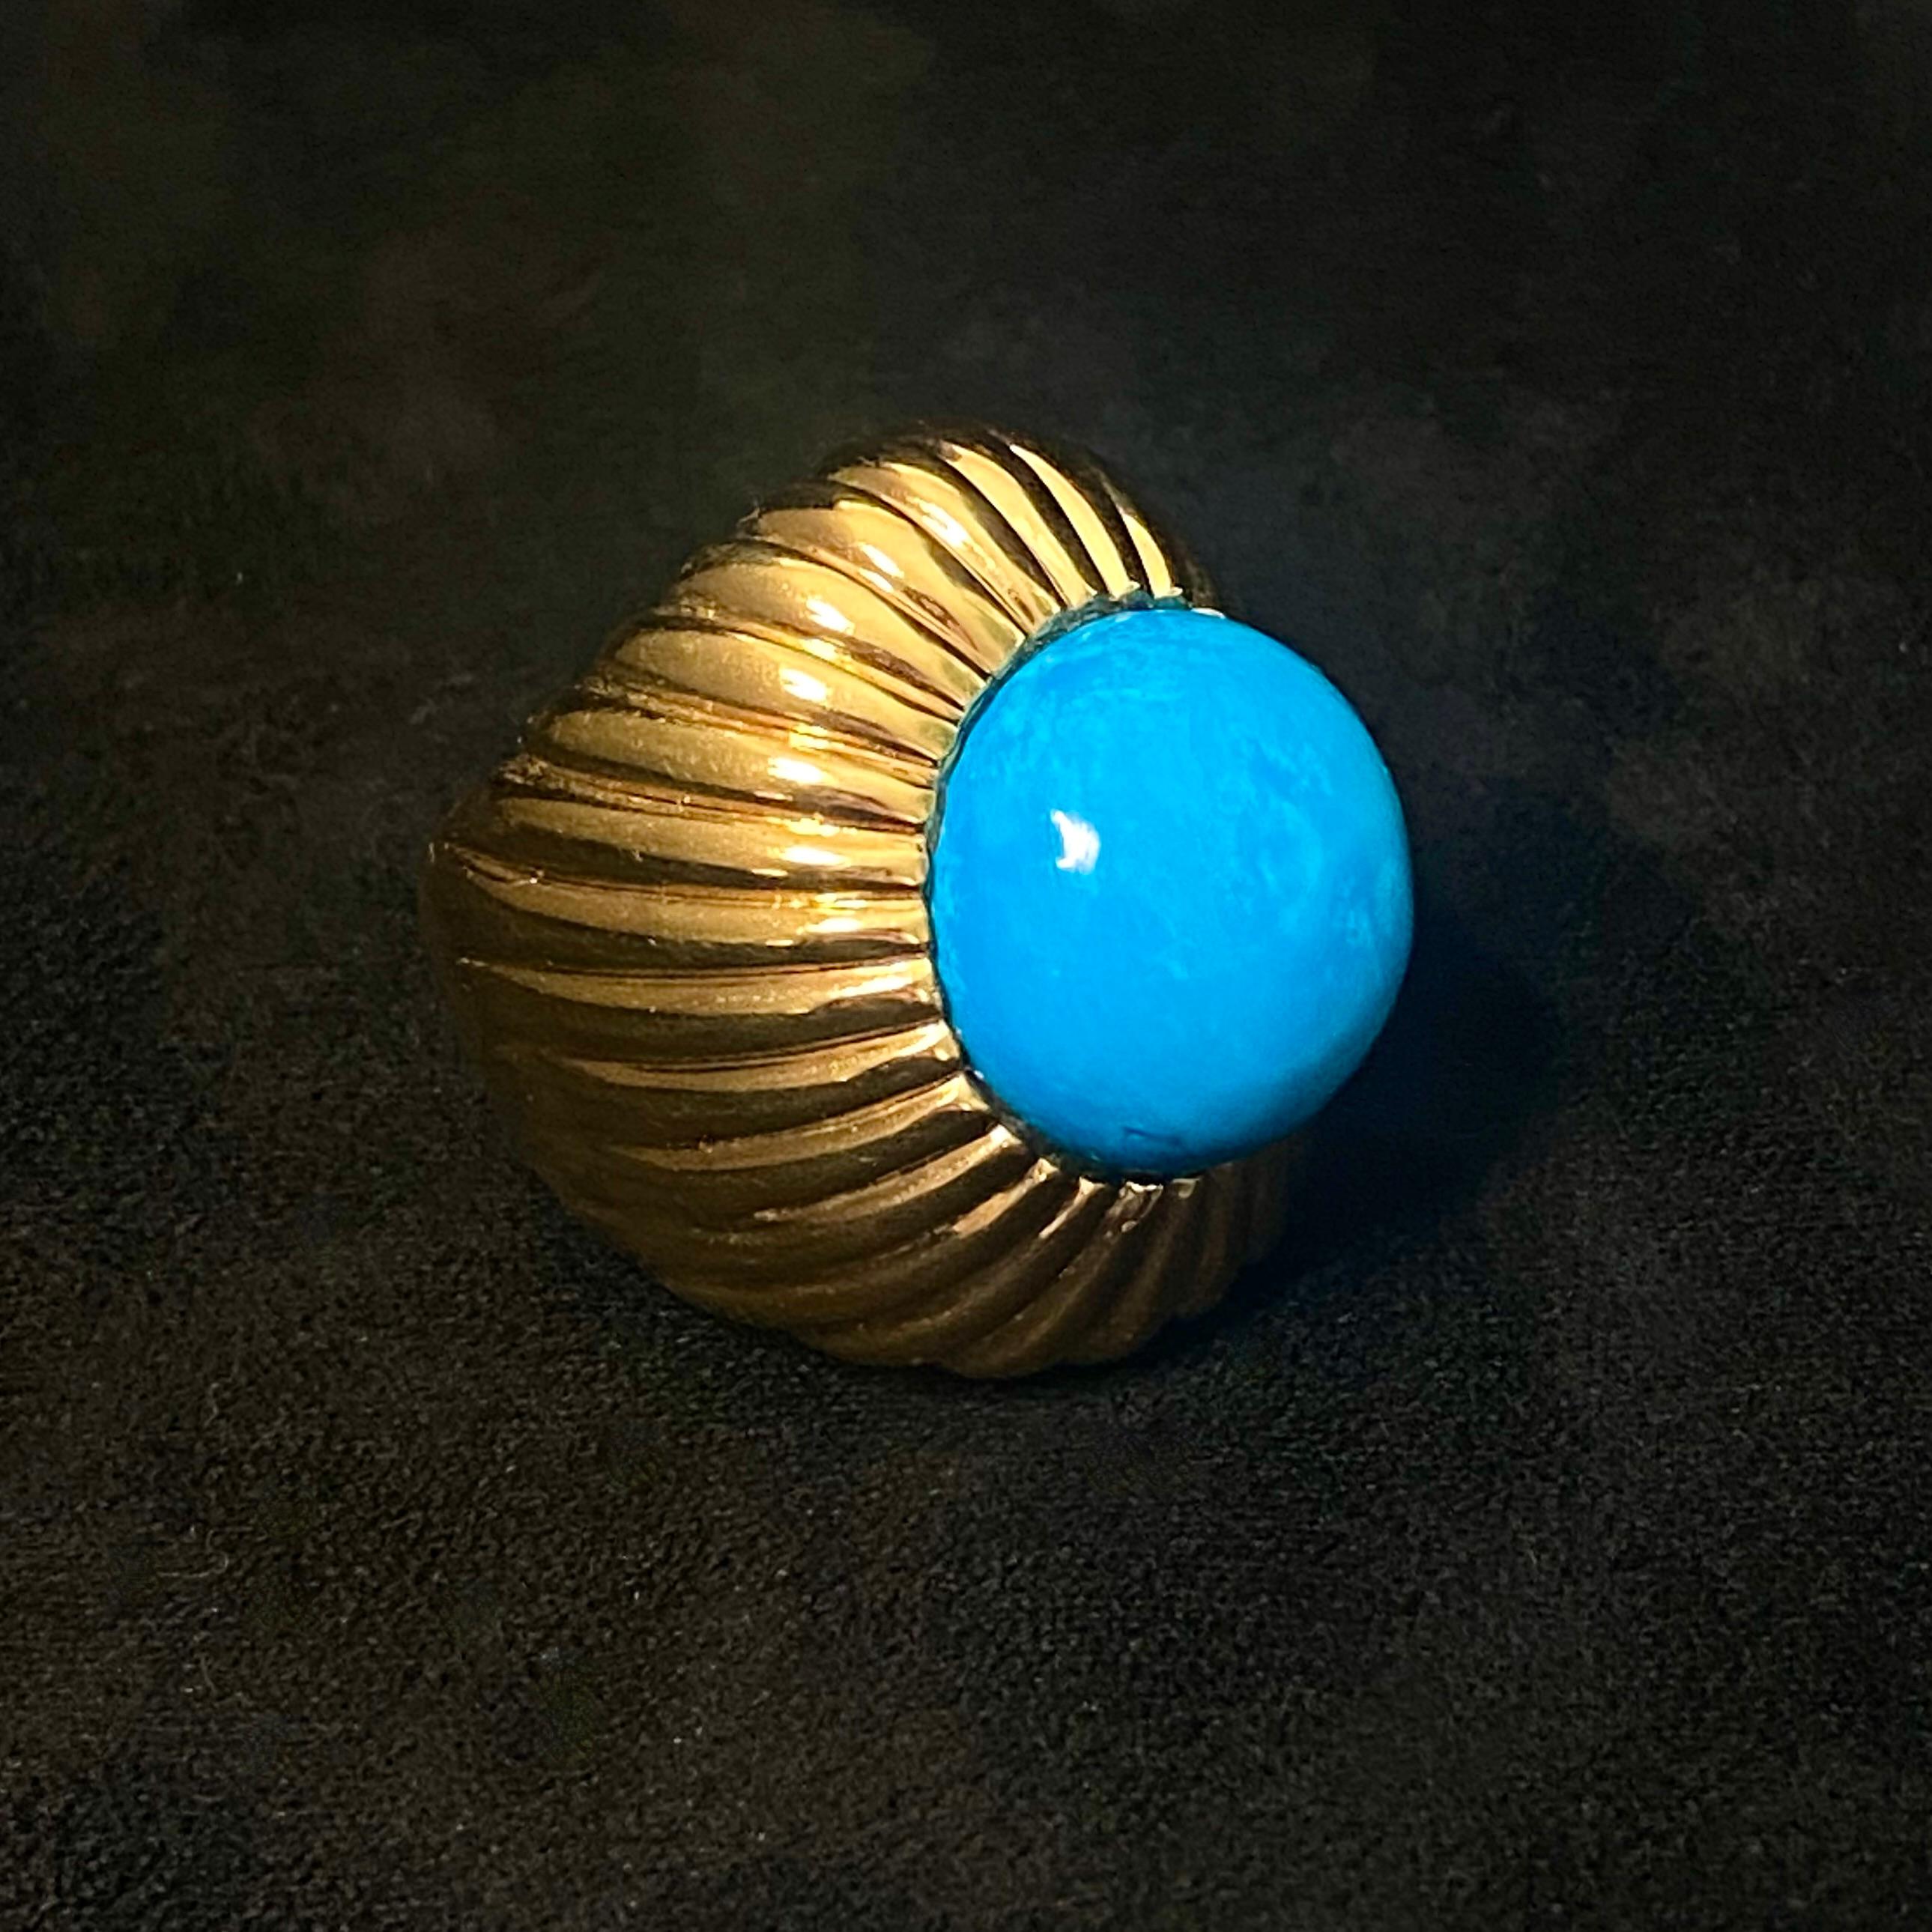 Set with a round Turquoise cabochon within a fluted mount, the Begum Ring is fabulously decadent & luxurious - it is impossible not to want a cocktail while wearing it.

Drawing inspiration from the Ottoman world, we feel that Turquoise is the